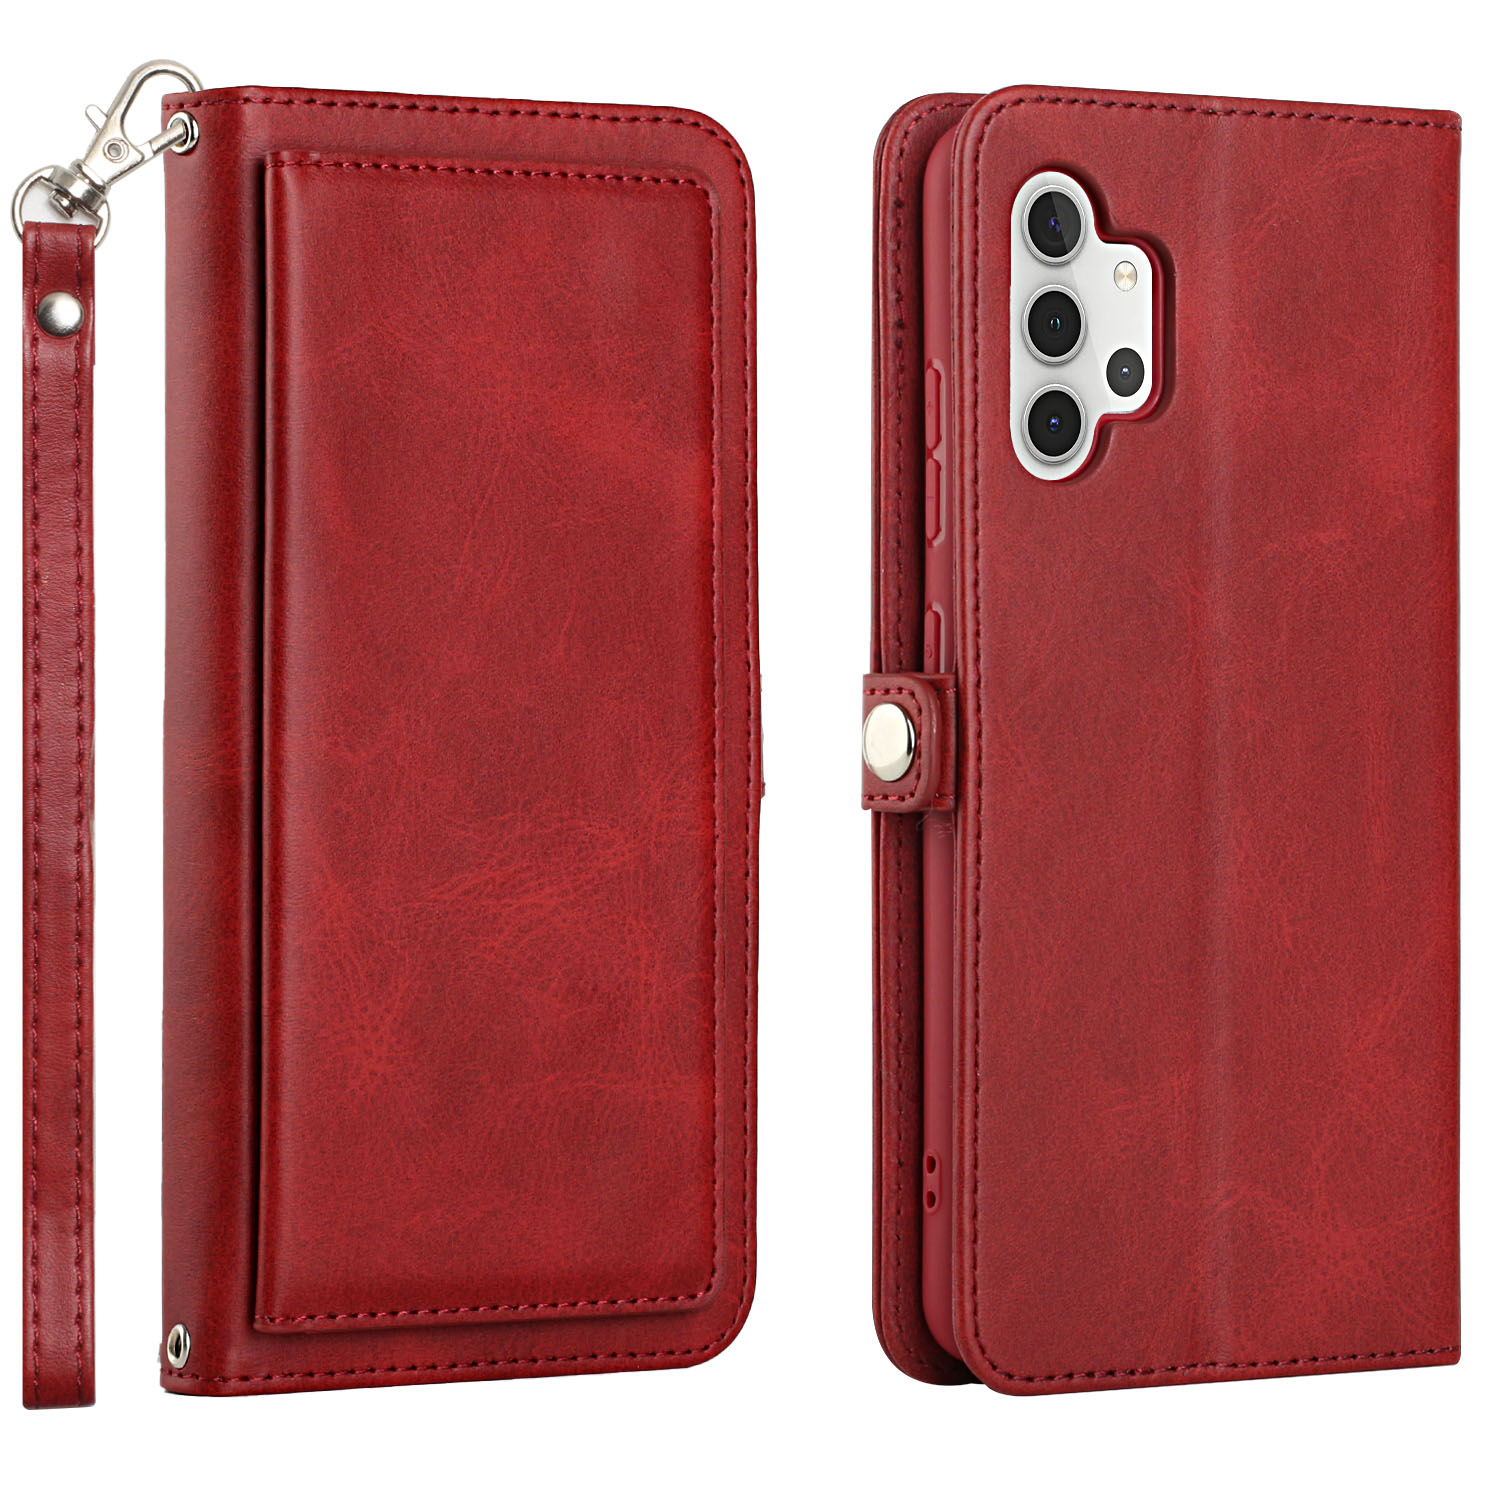 Premium PU Leather Folio WALLET Front Cover Case for Galaxy A32 4G (Red)